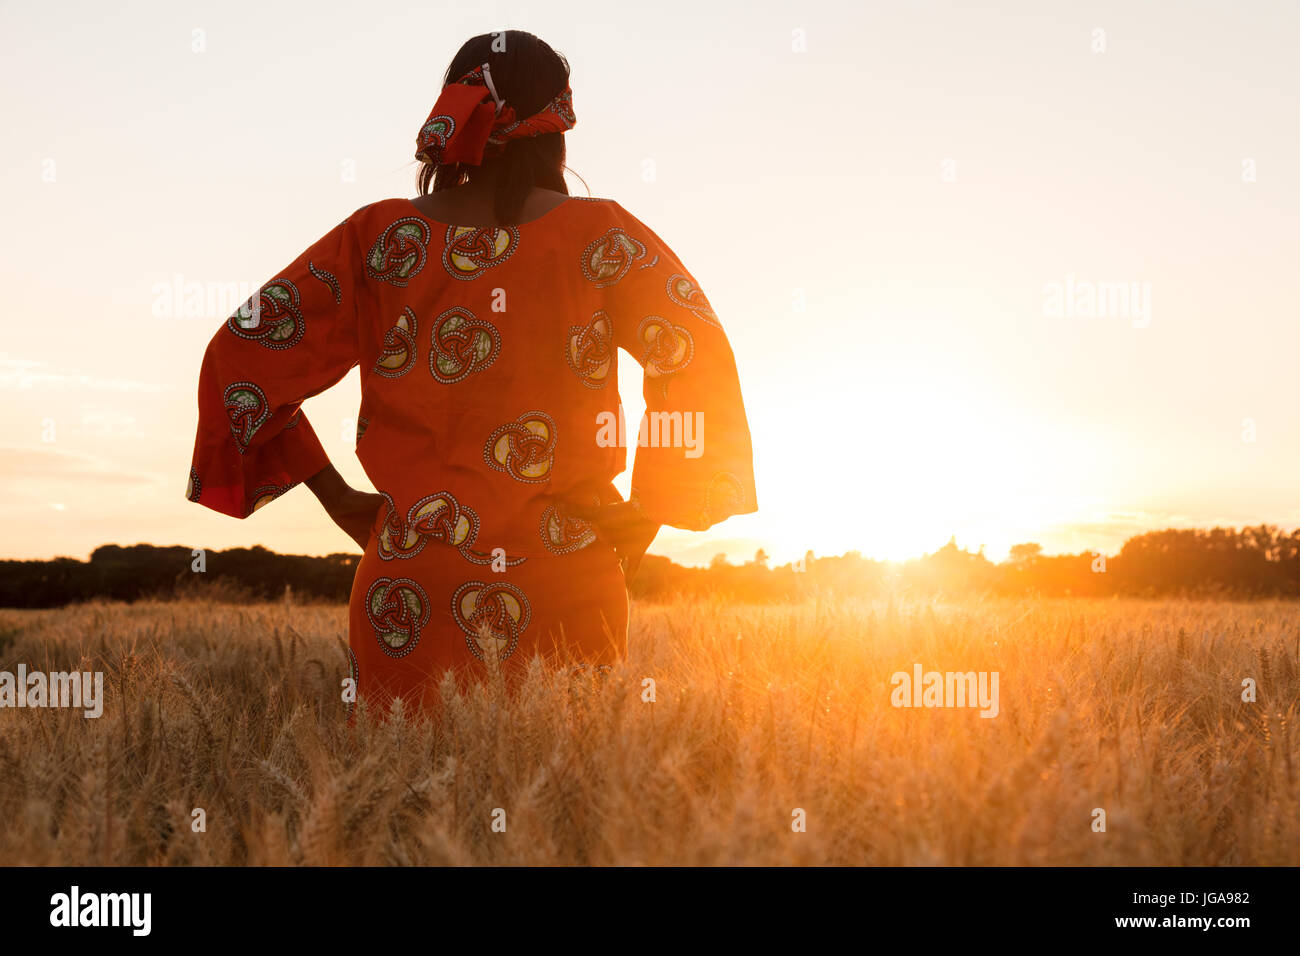 African woman in traditional clothes standing with her hands on her hips in field of barley or wheat crops at sunset or sunrise Stock Photo